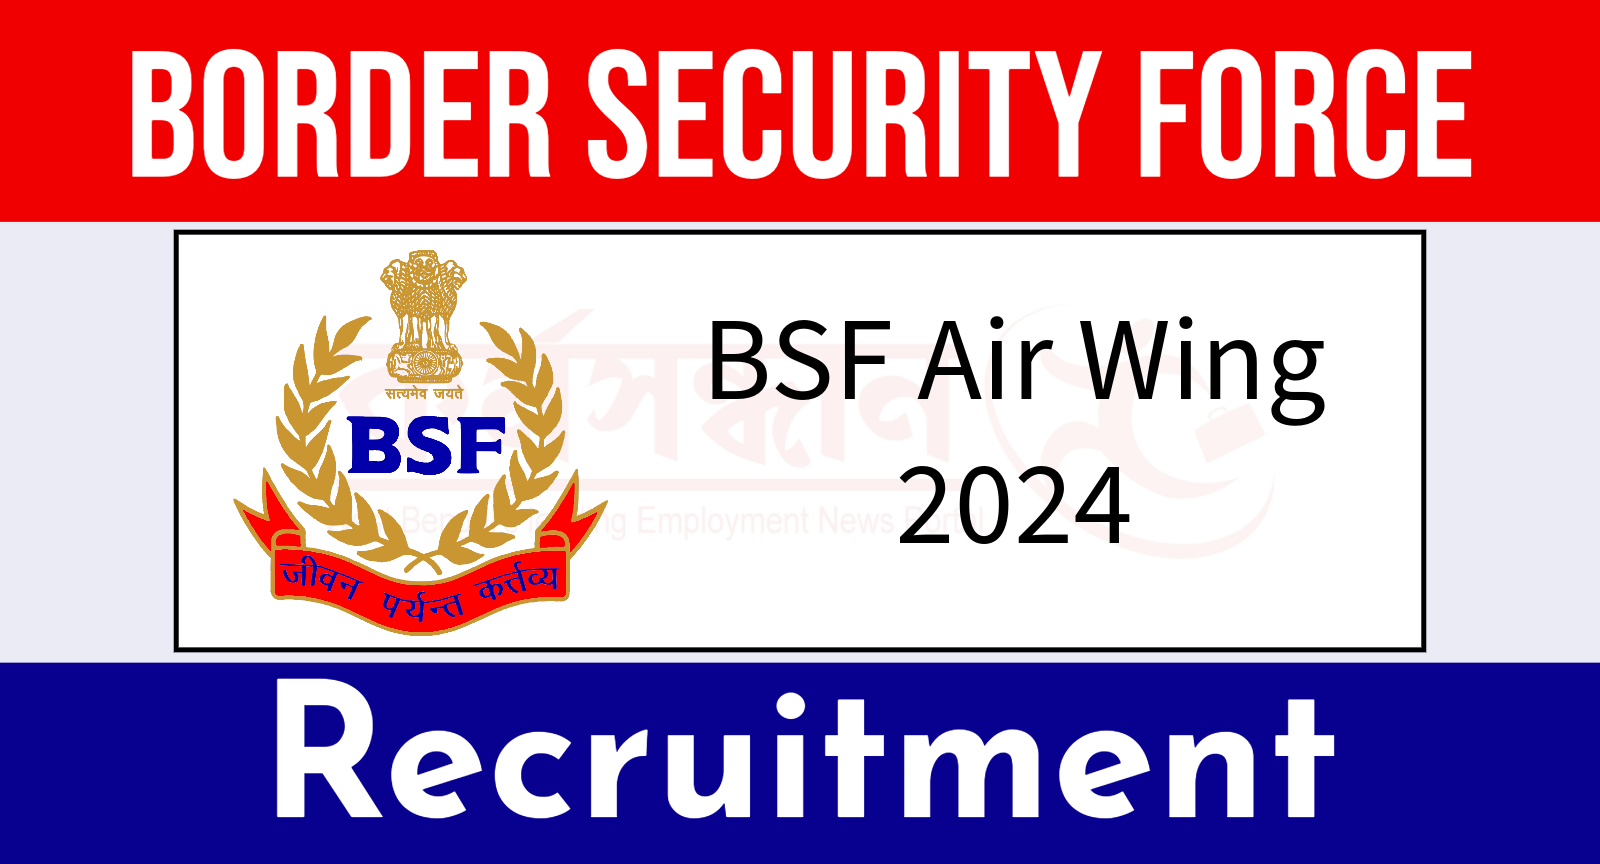 BSF Recruitment 2024 Apply Now under Various Air Wing Posts